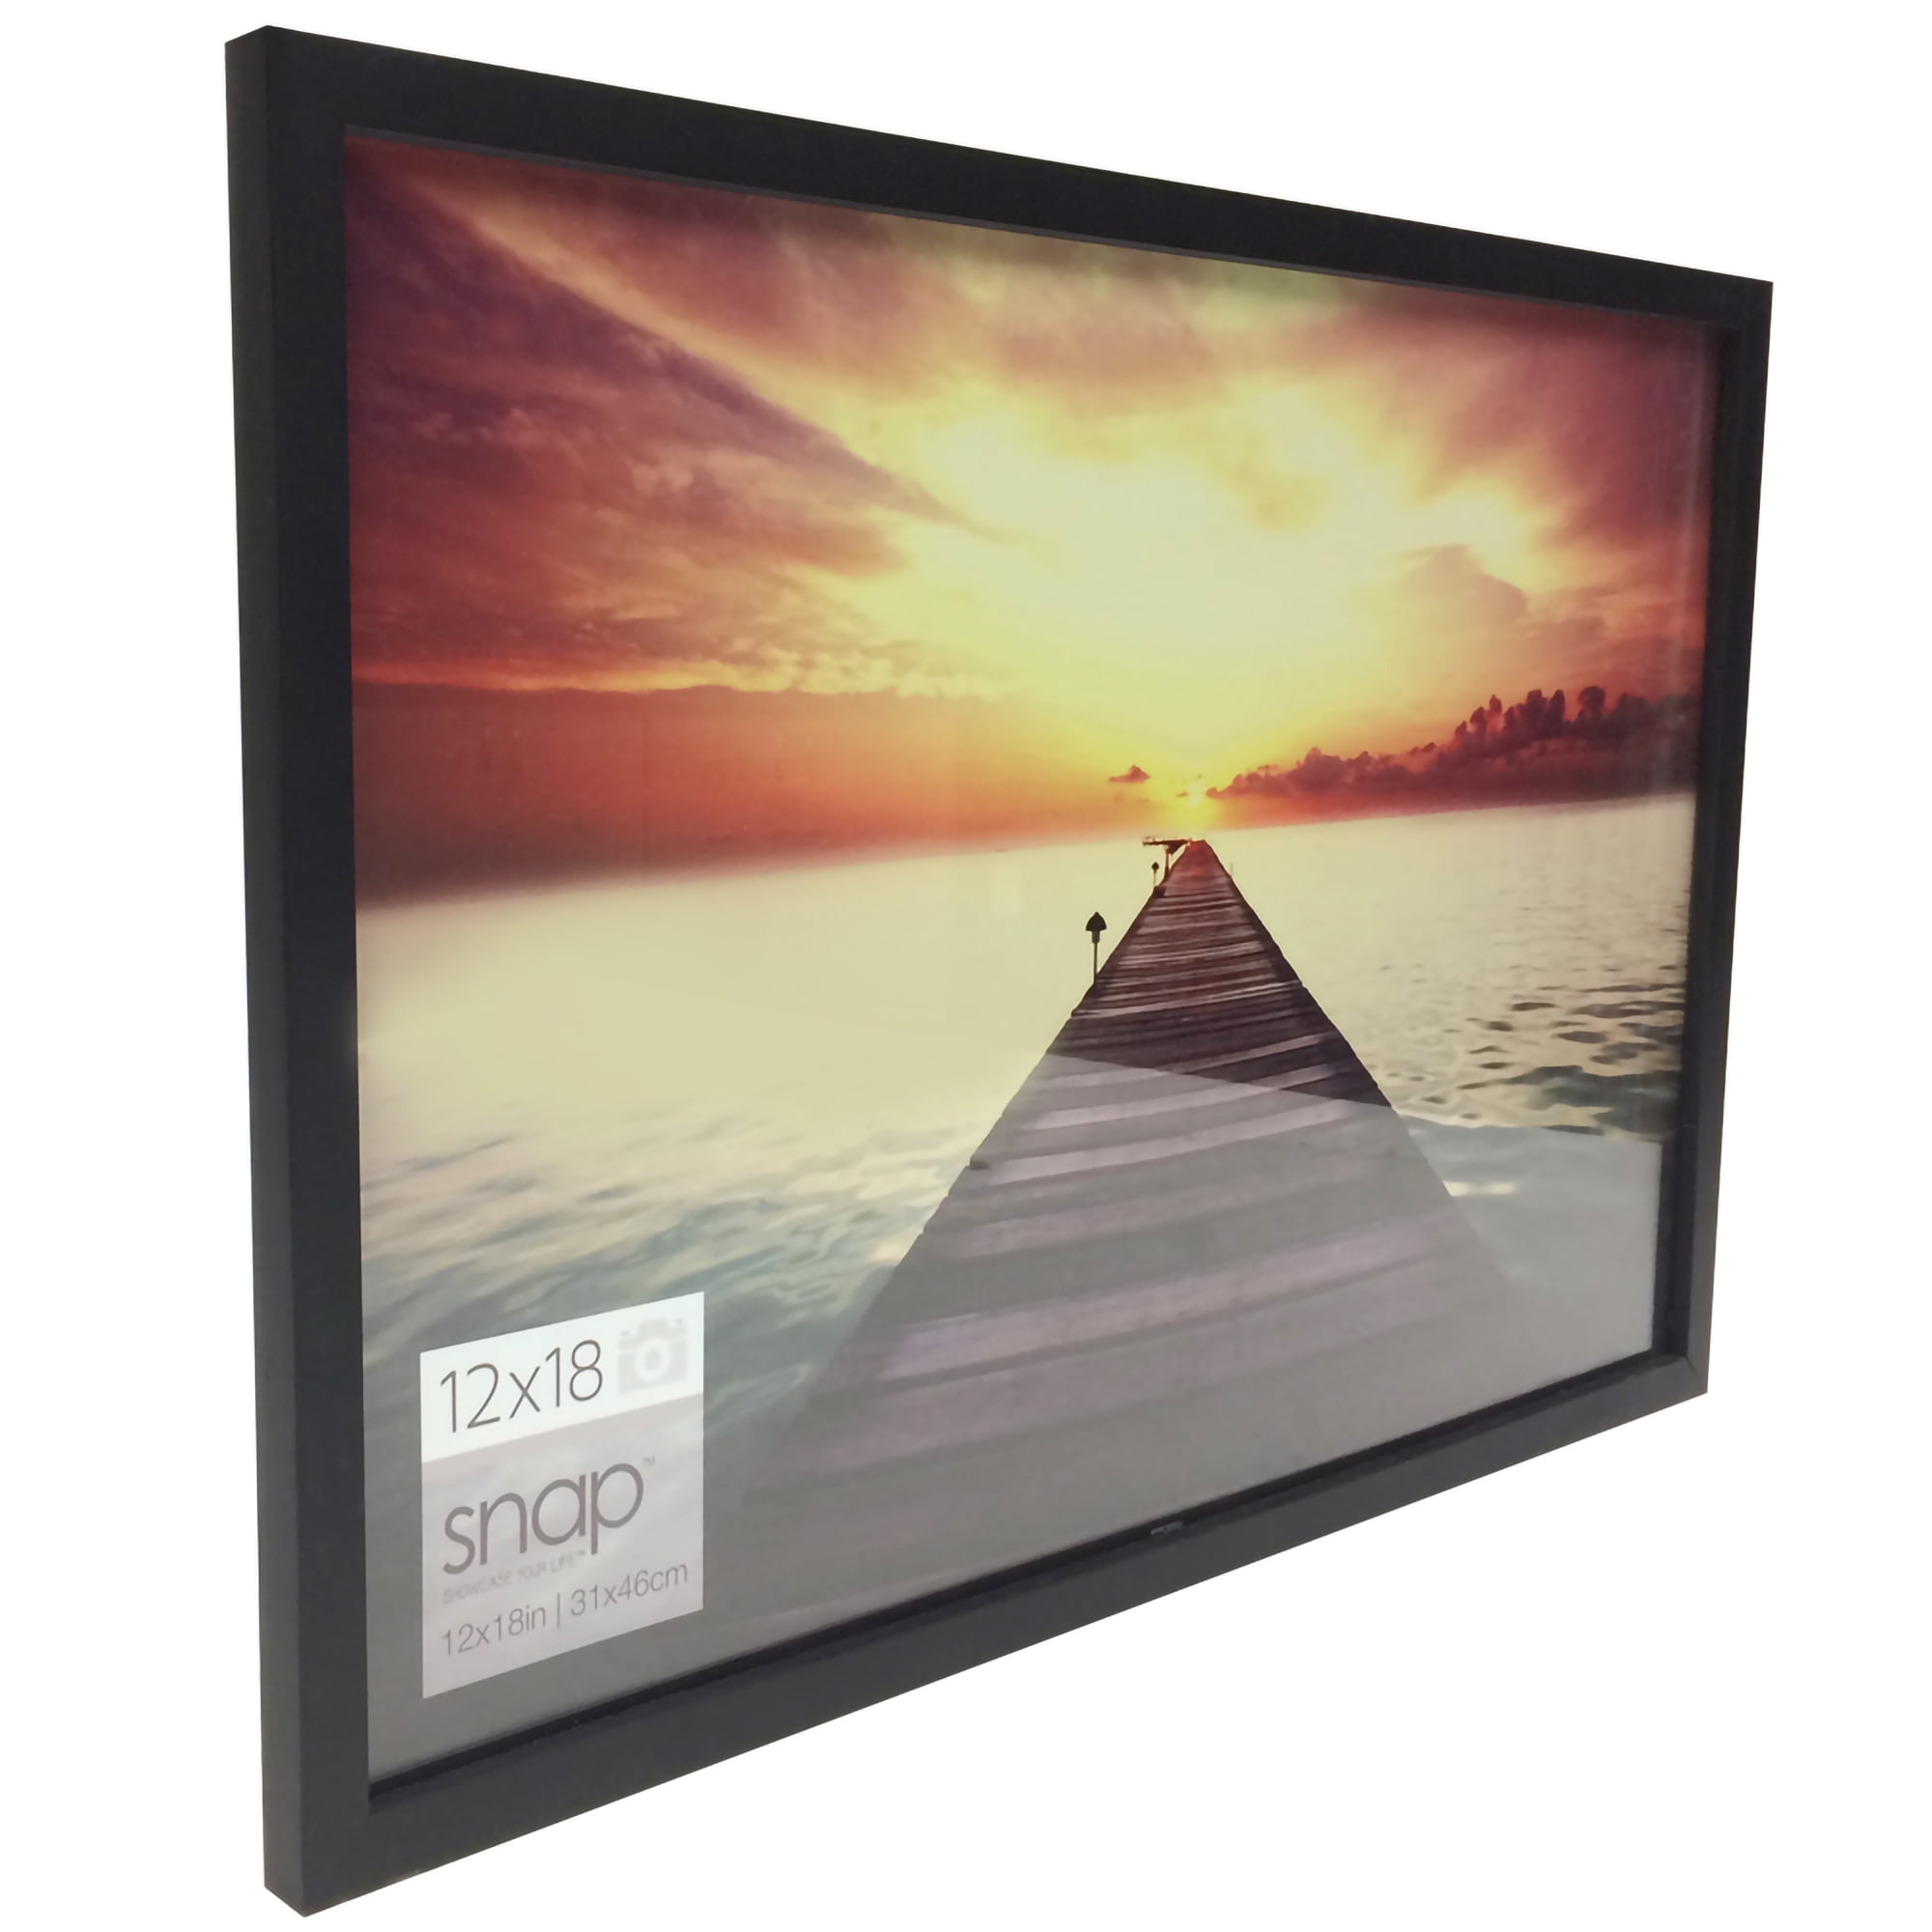 BD ART 12x16 (30x40 cm) Black Picture Frame Made of Wood and High  Definition Glass Display Pictures 8x12 with Mat or 12x16 Without Mat -  Vertical and